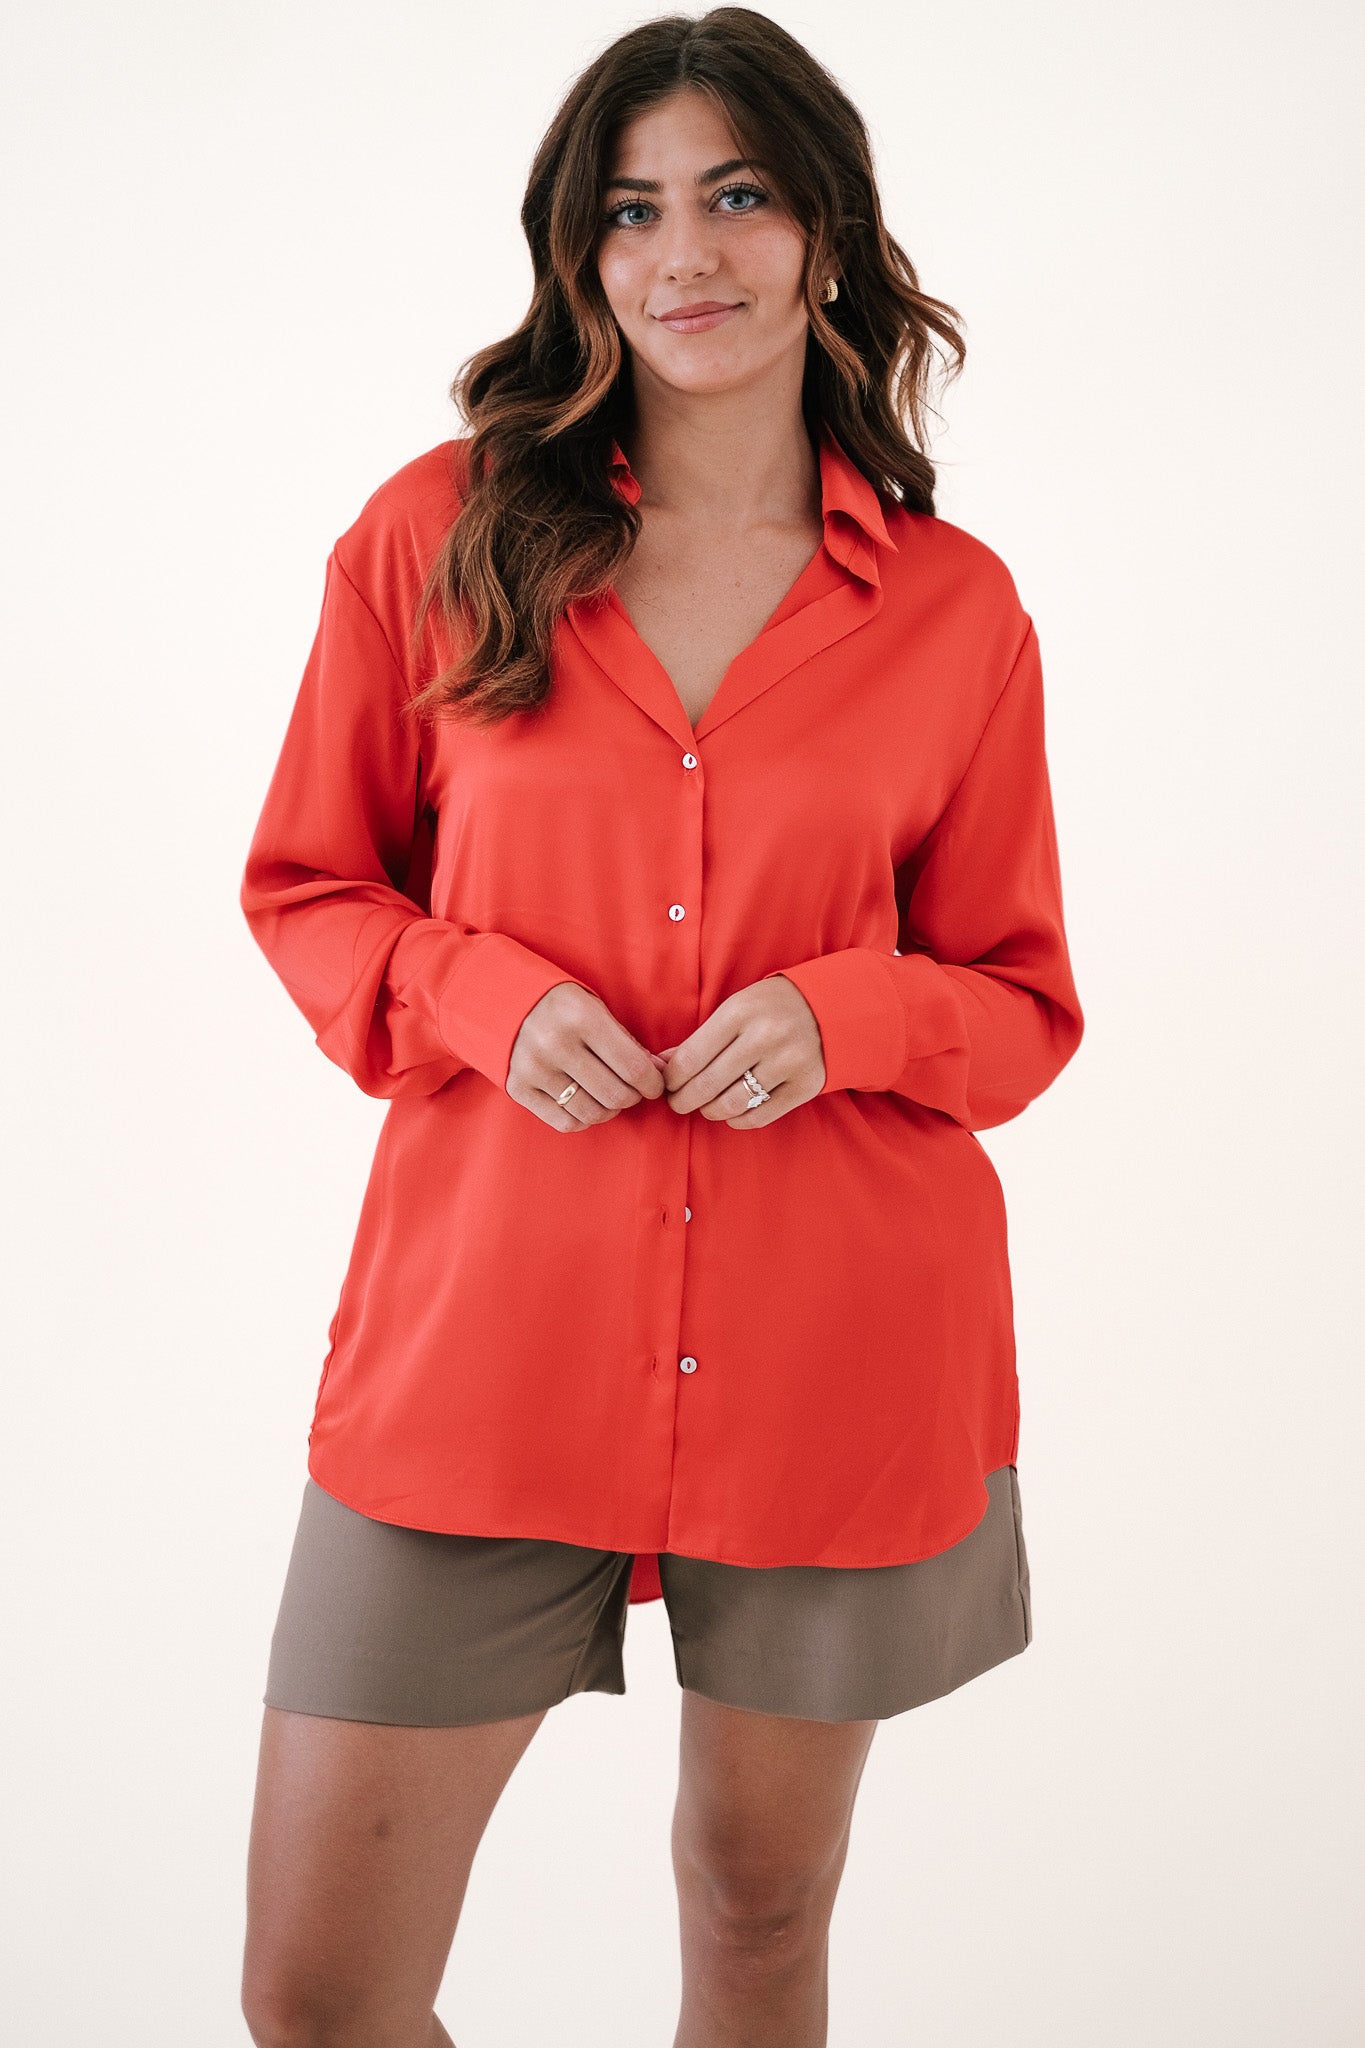 Lucy Paris Elena Red Satin Buttoned Top